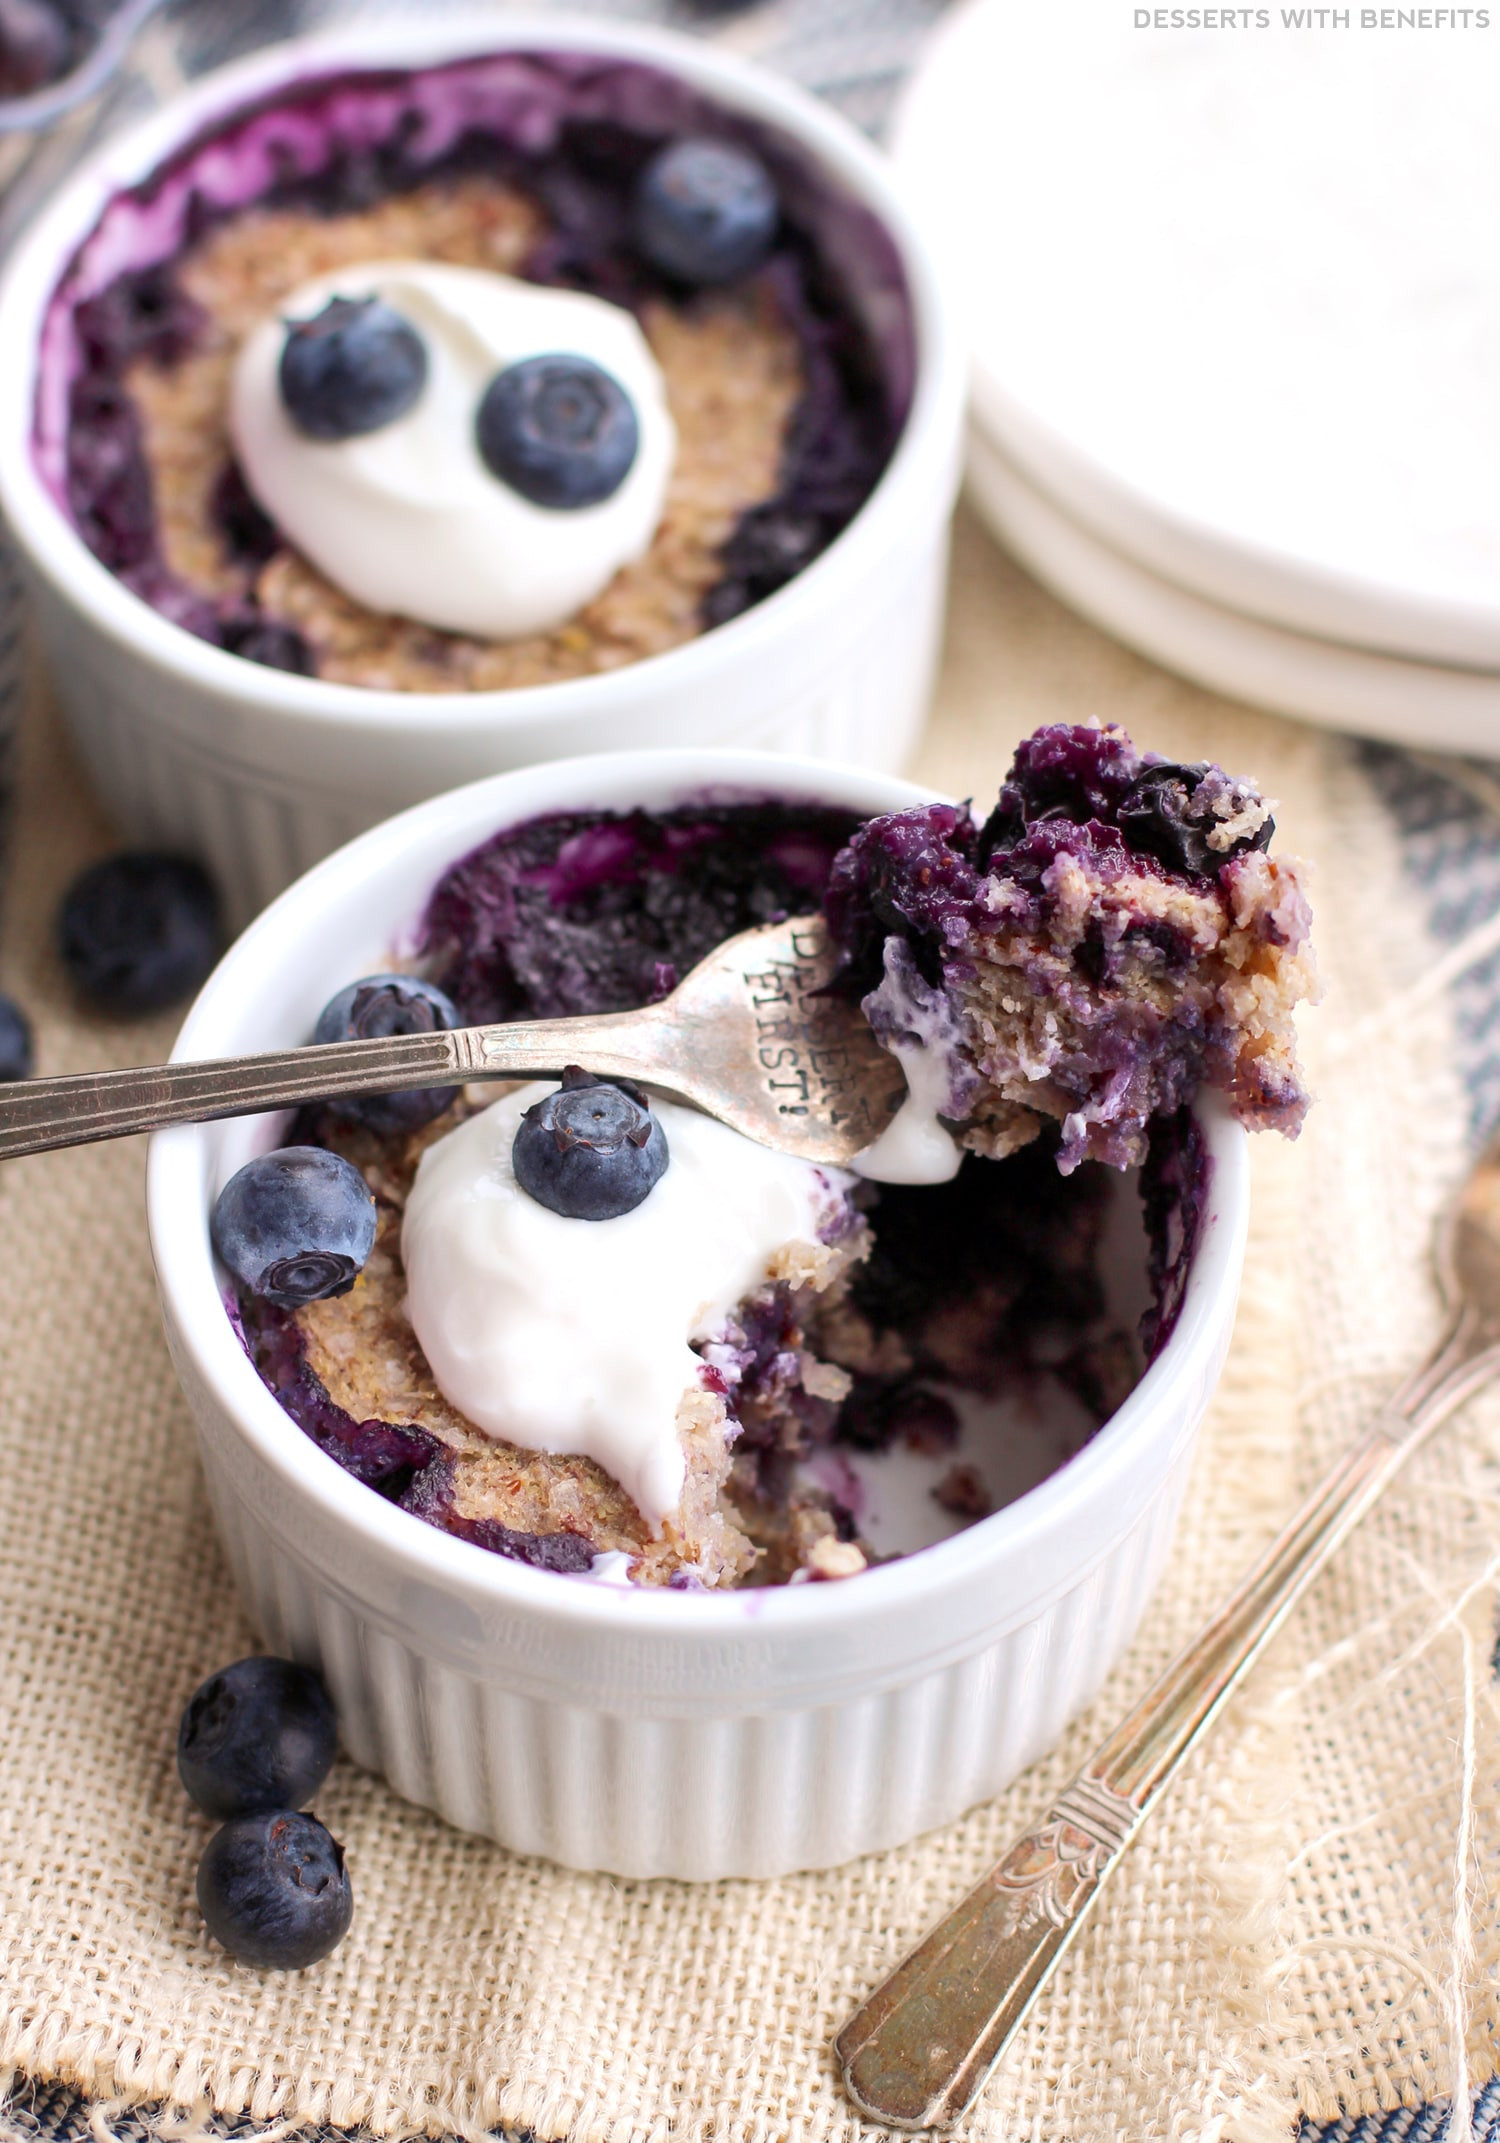 Healthy Blueberry Dessert Recipes
 Healthy Microwaveable Blueberry Quinoa Flake Muffins